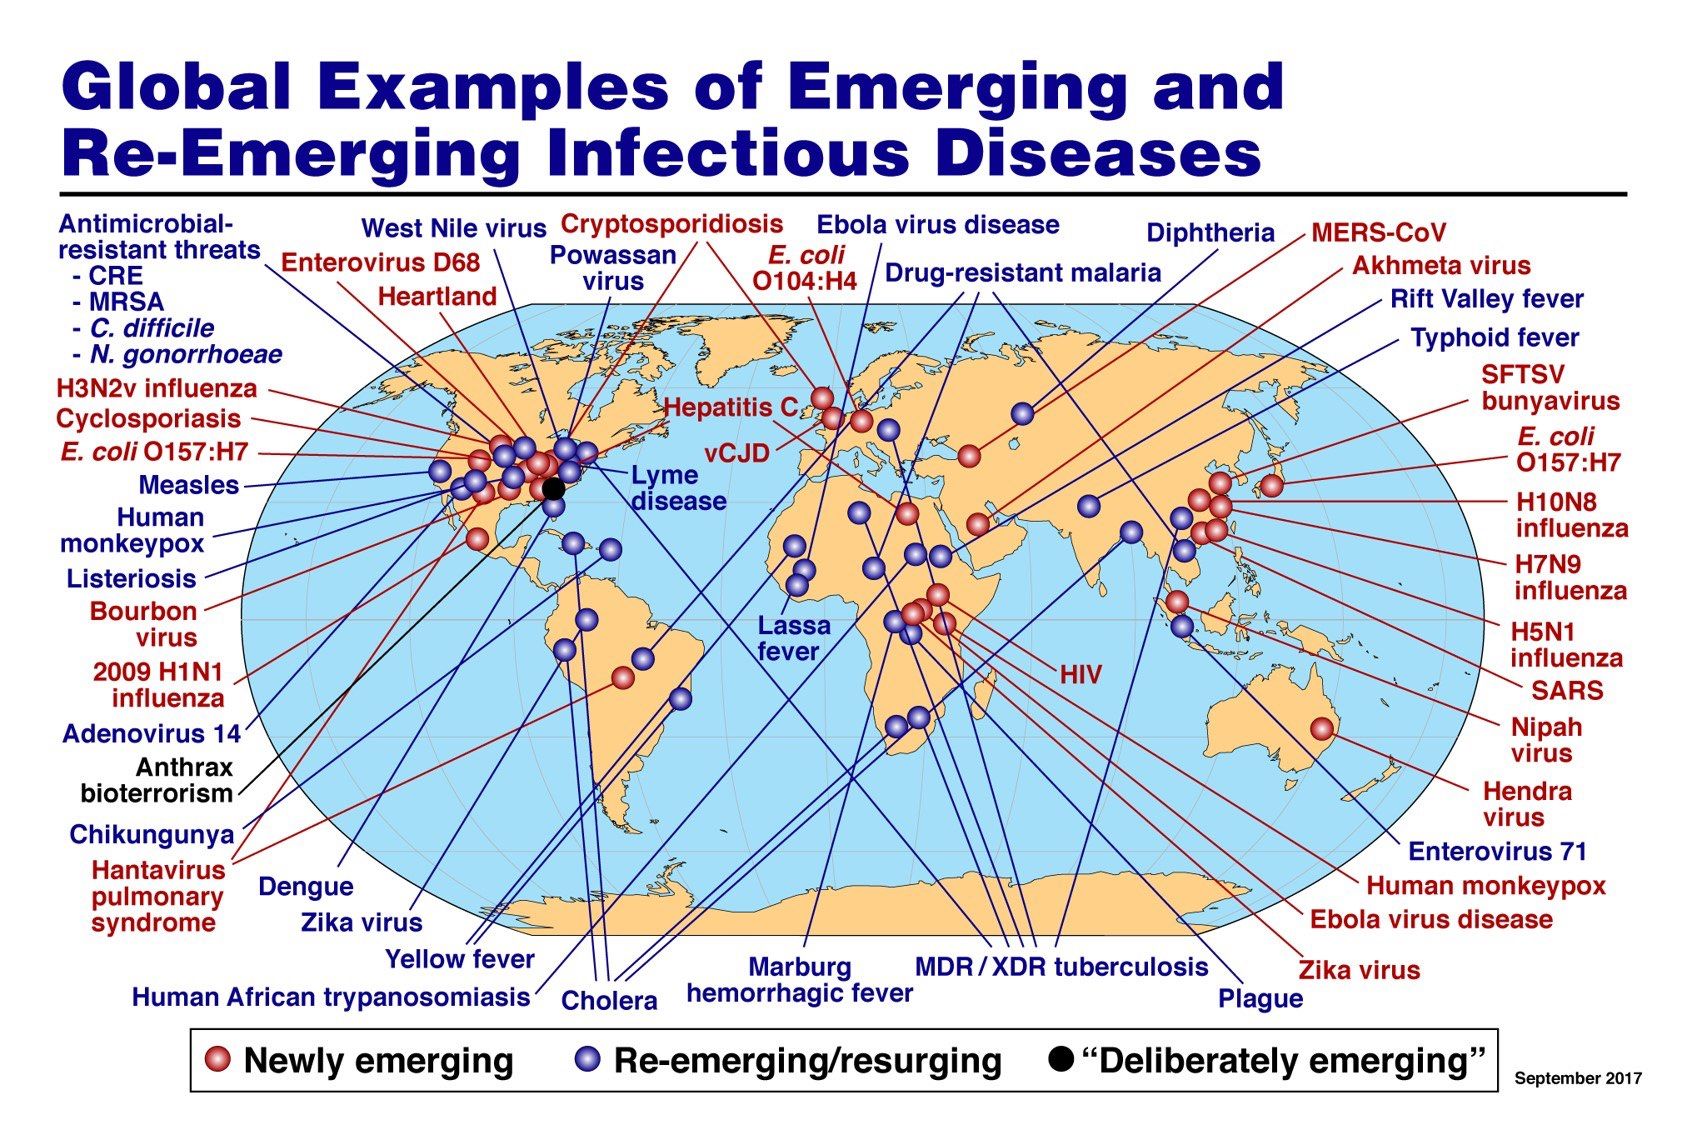 Re-emerging infectious diseases